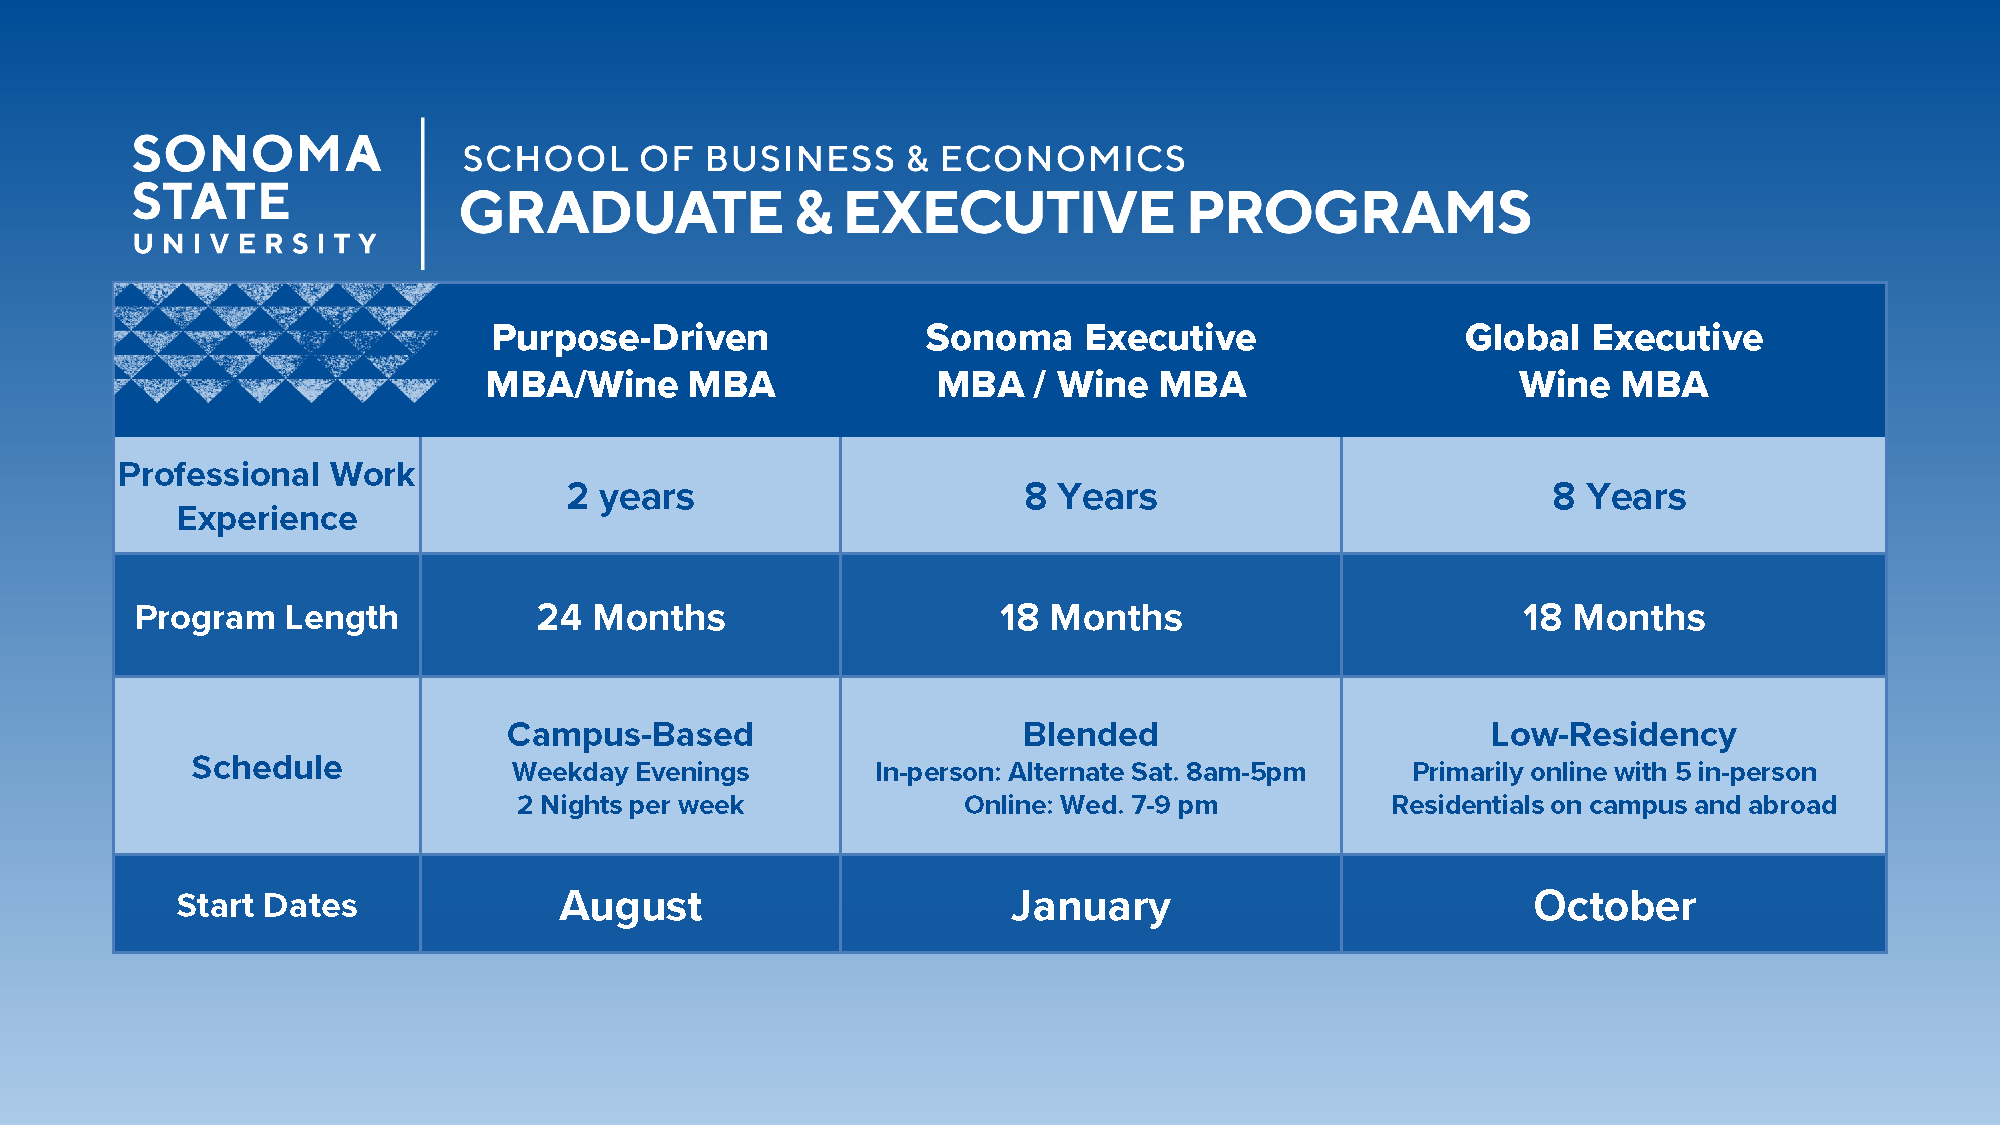 schematic of different graduate programs at School of Business and Economics